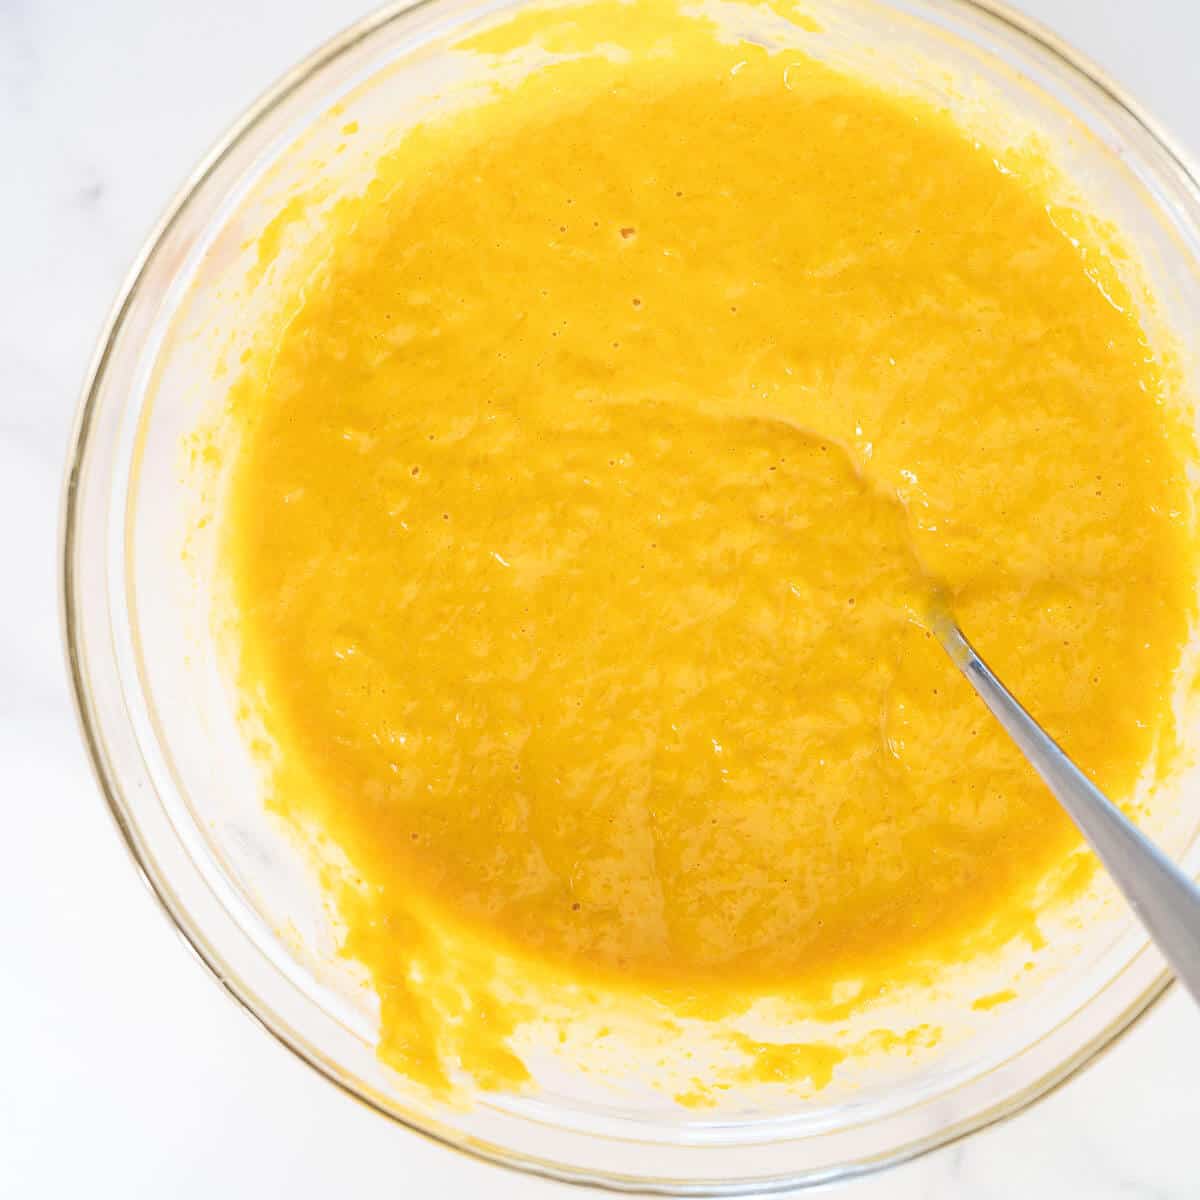 mixing pumpkin puree, egg and peanut butter in a bowl